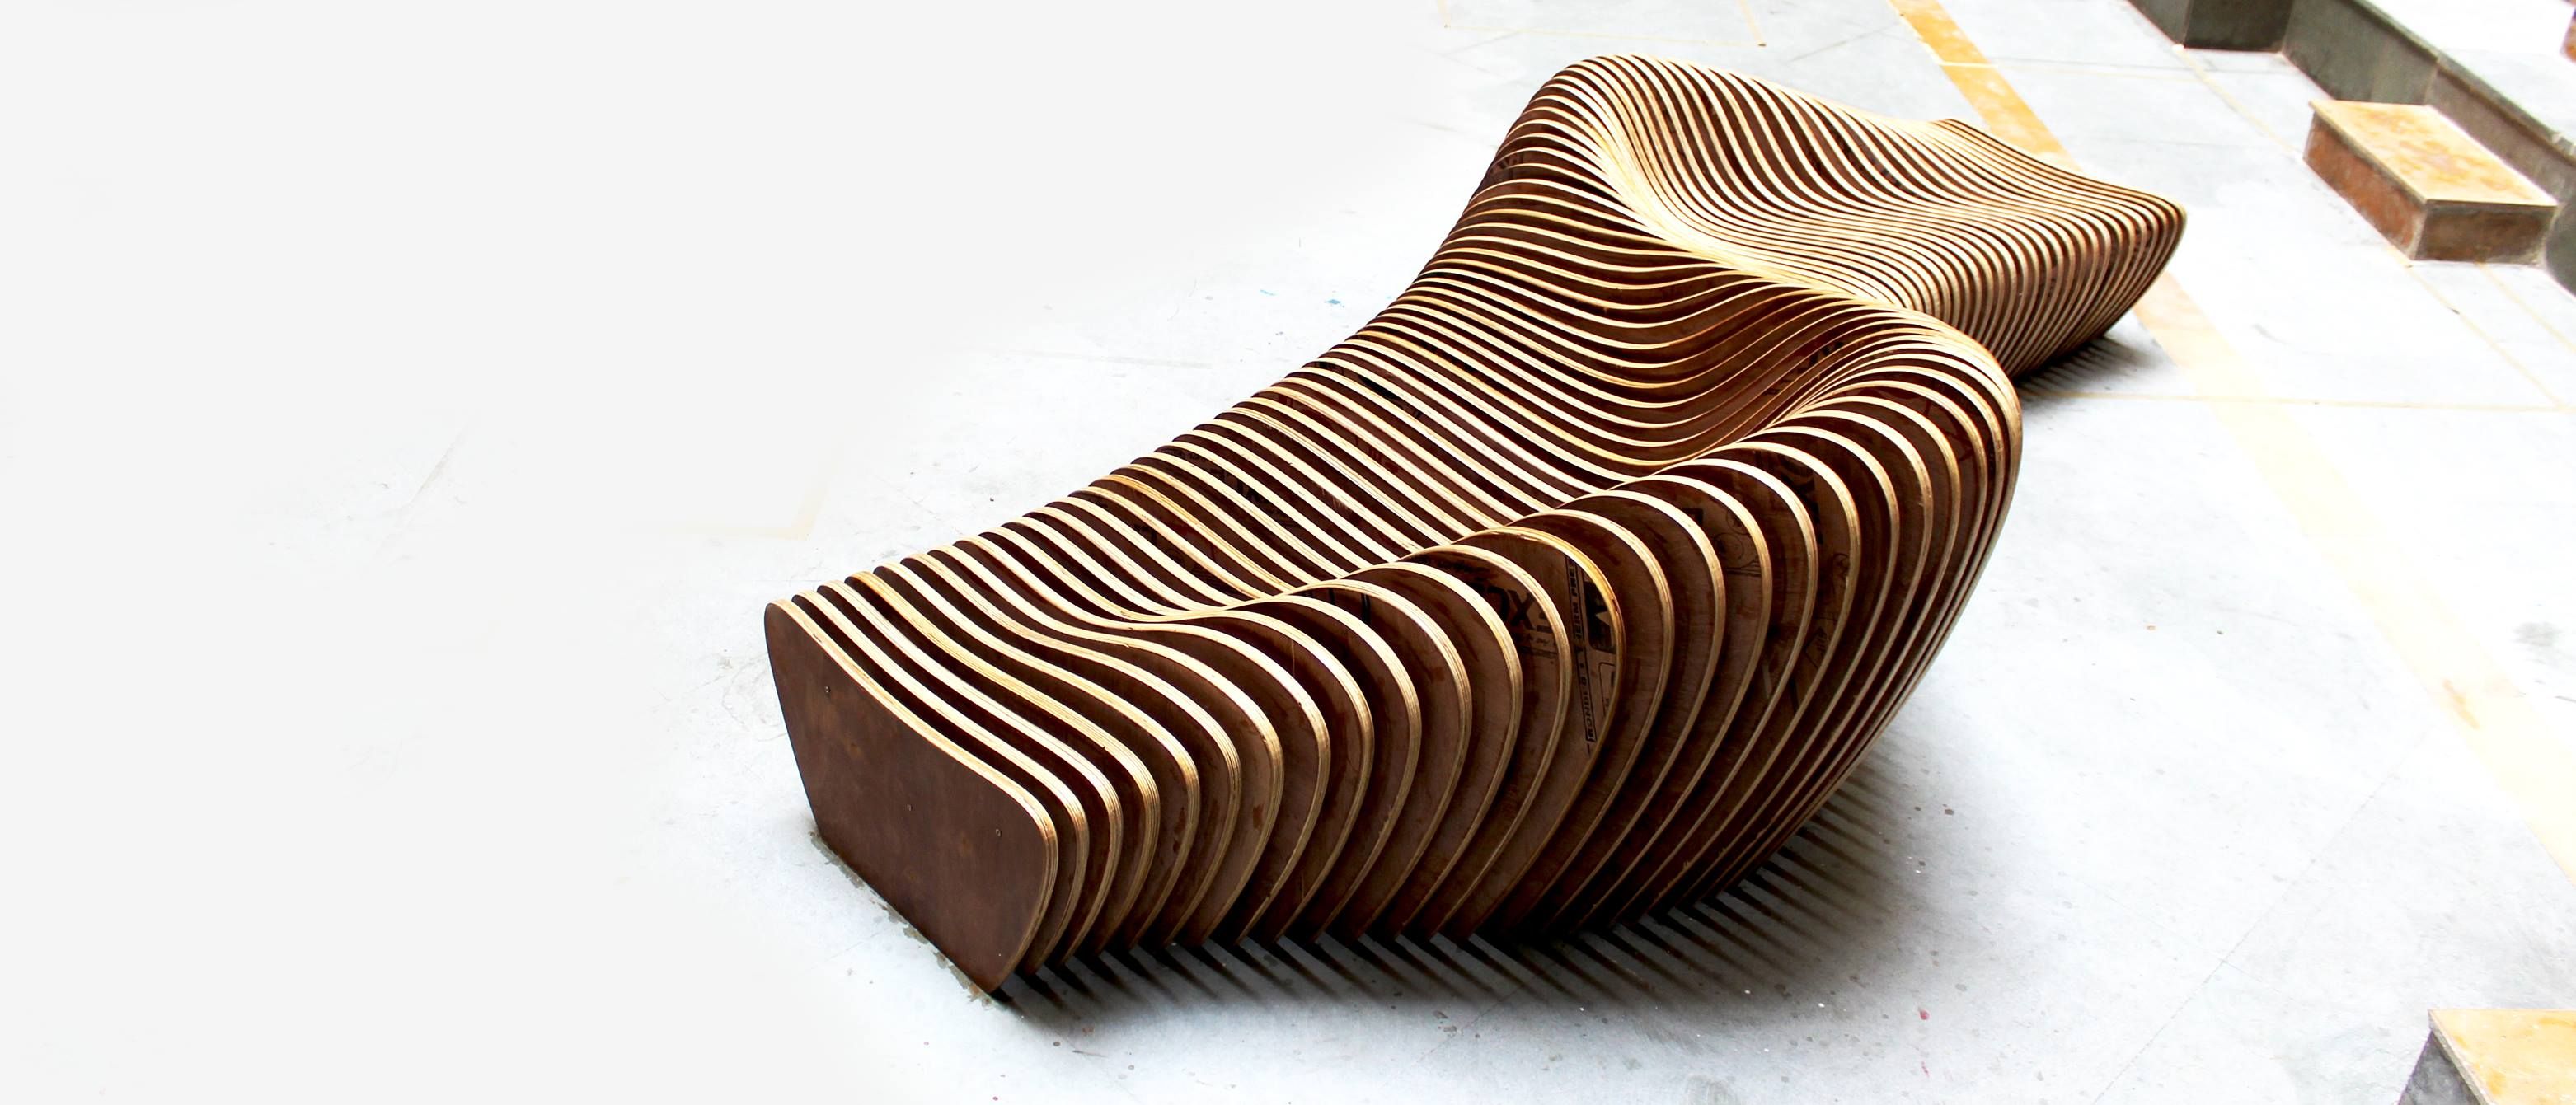 A flowy piece of furniture developed using Rhino 3D